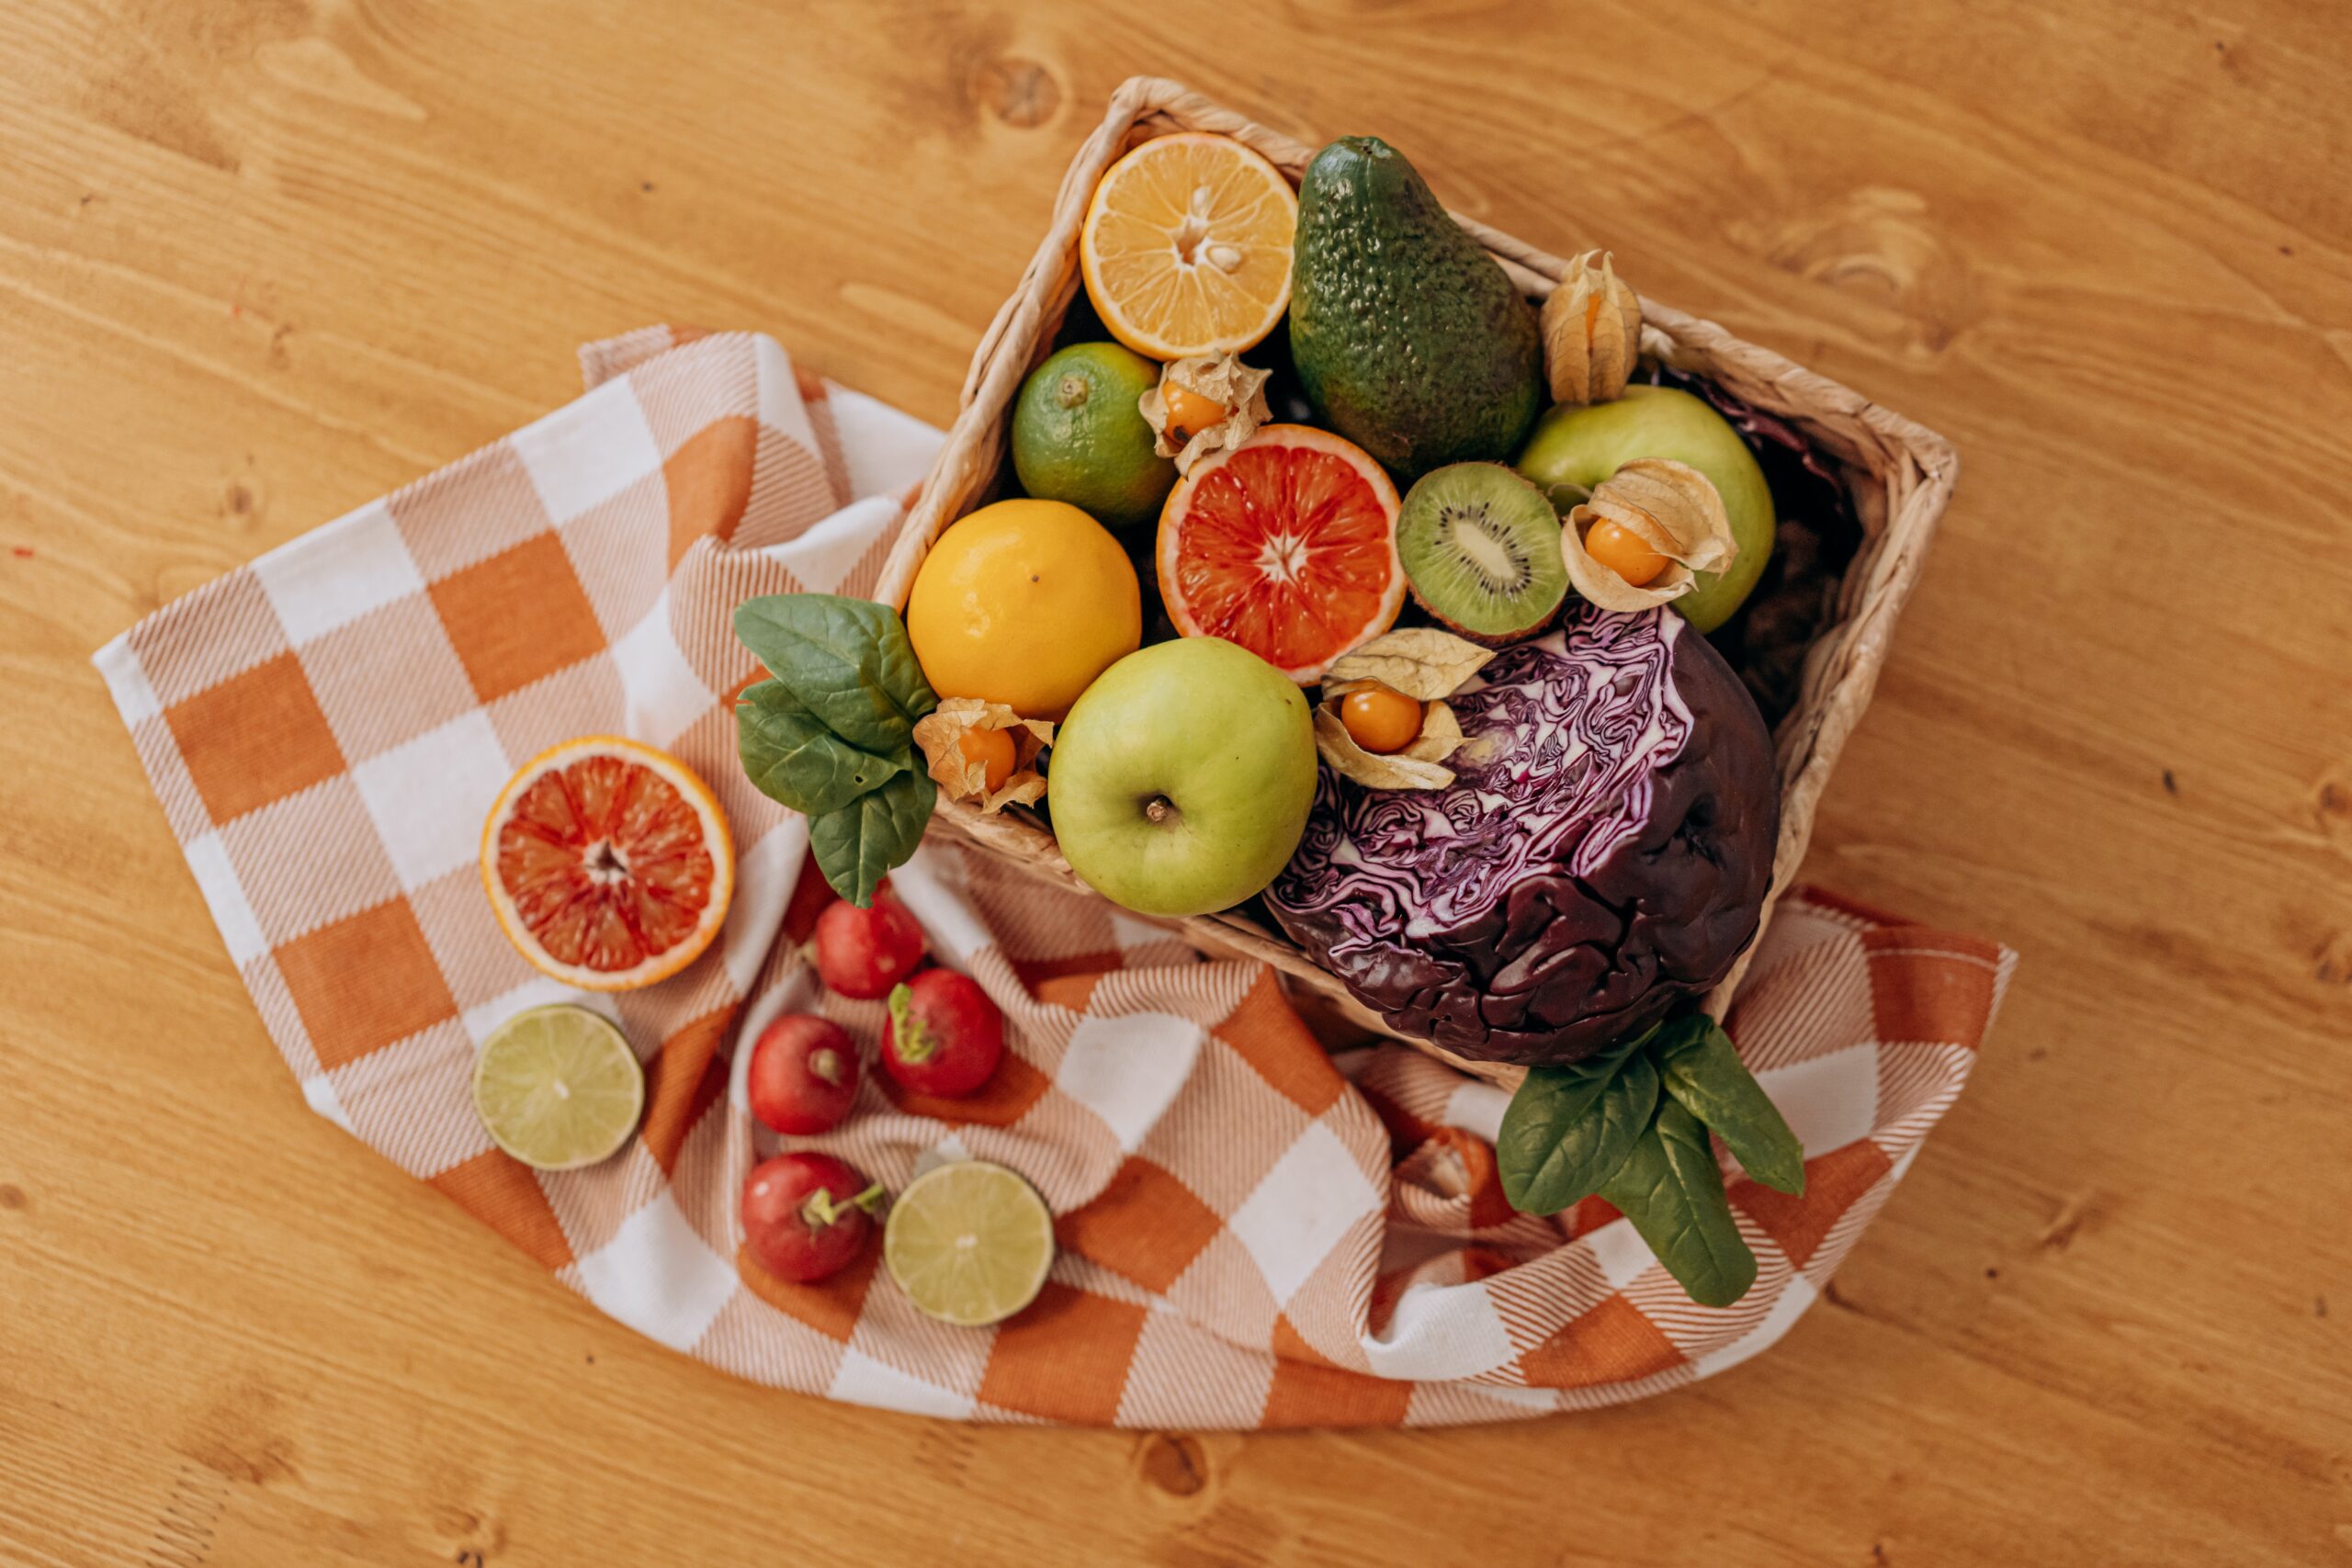 A fruit and vegetable wooden basket and an orange and white chequered picnic cloth with wooden background.